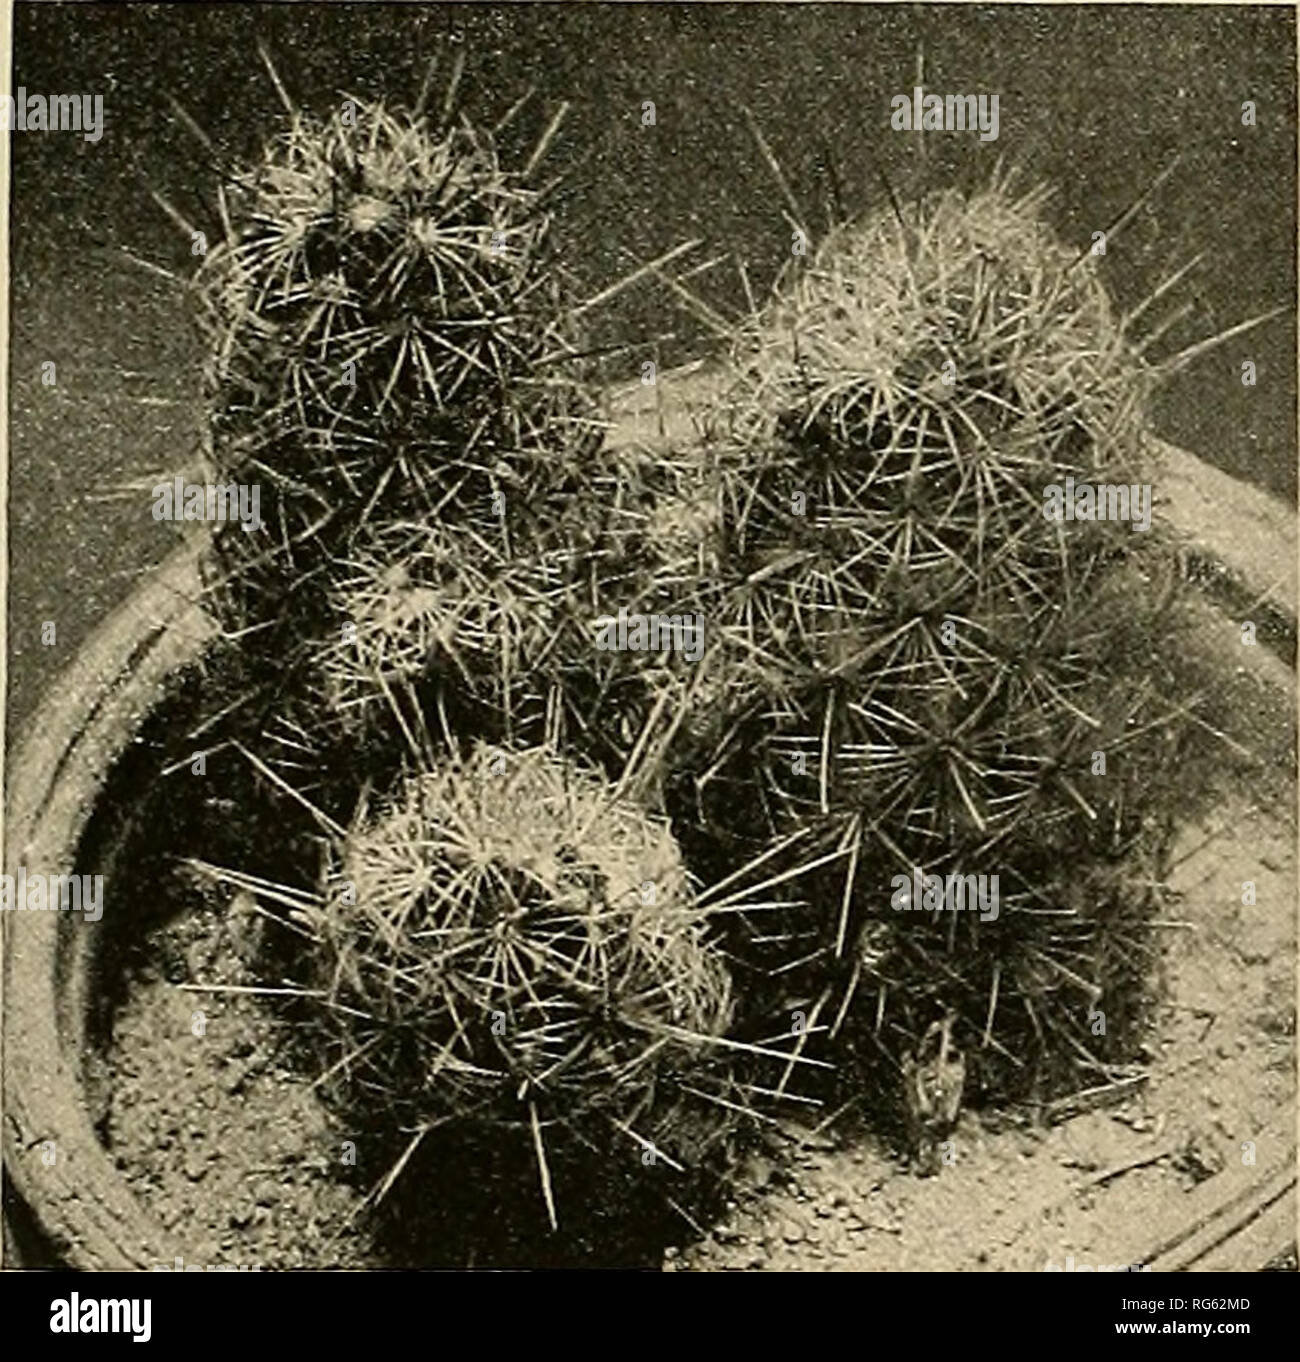 . The Cactaceae : descriptions and illustrations of plants of the cactus family. 136 THE CACTACEAE. they are now preserved. In April 1921 Mr. Vernon Bailey rediscovered the species in Arizona and sent in a number of living specimens, but none has yet flowered. Mr. Orcutt reports that he has collected specimens which have hooked spines. Mr. Orcutt dedicated this species to his wife, Mrs. Olivia Orcutt. Figure 147 is from a photograph of two plants sent by Mr. Vernon Bailey from Continental, Arizona, in 1920. 98. Neomammillaria echinaria (JDe Candolle). Mammillaria echinaria De Candolle, Mem. Mu Stock Photo